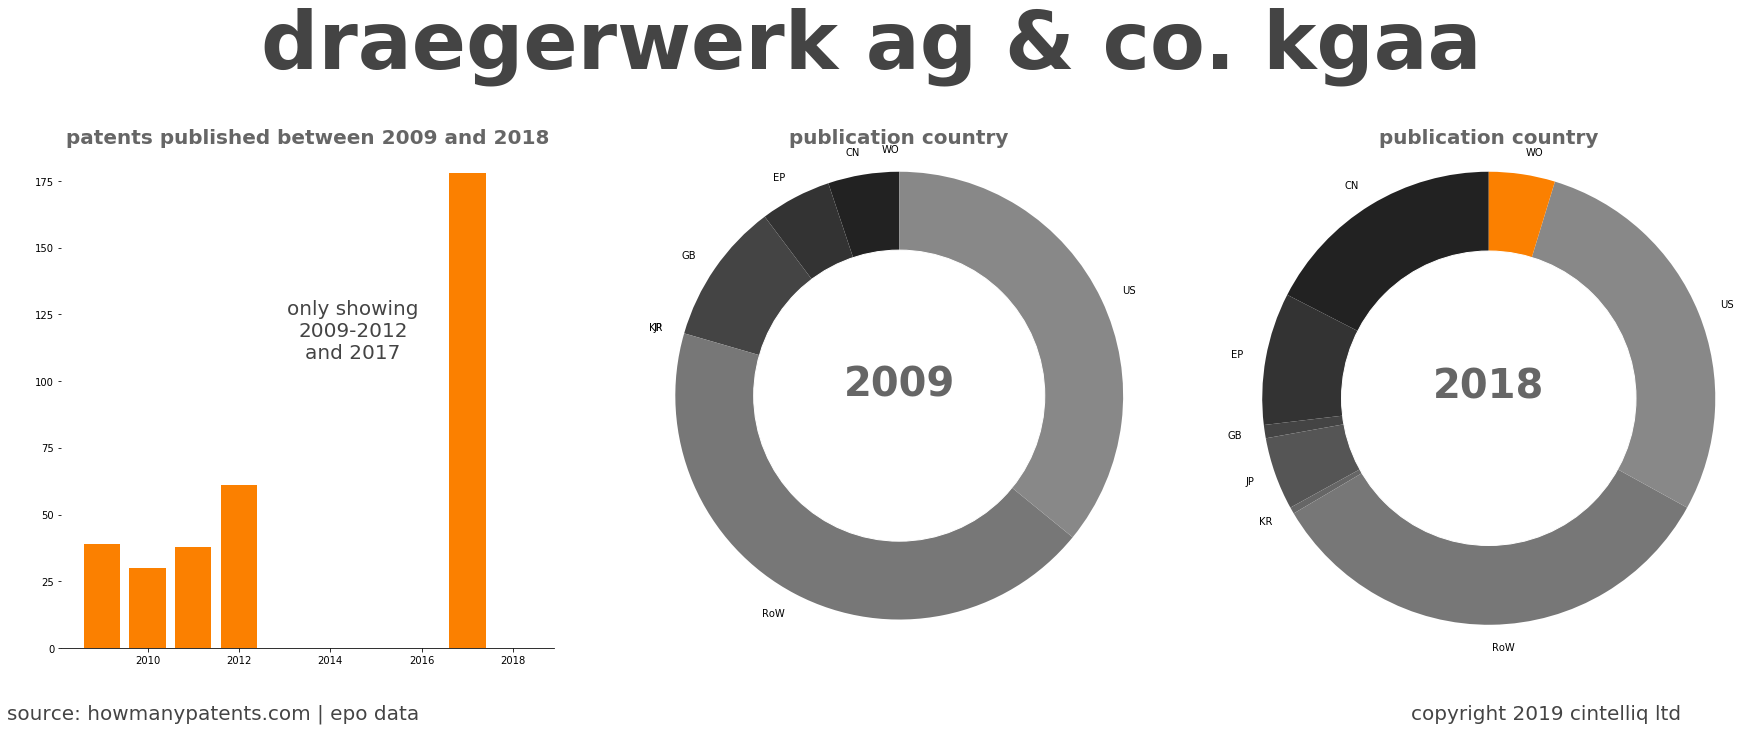 summary of patents for Draegerwerk Ag & Co. Kgaa